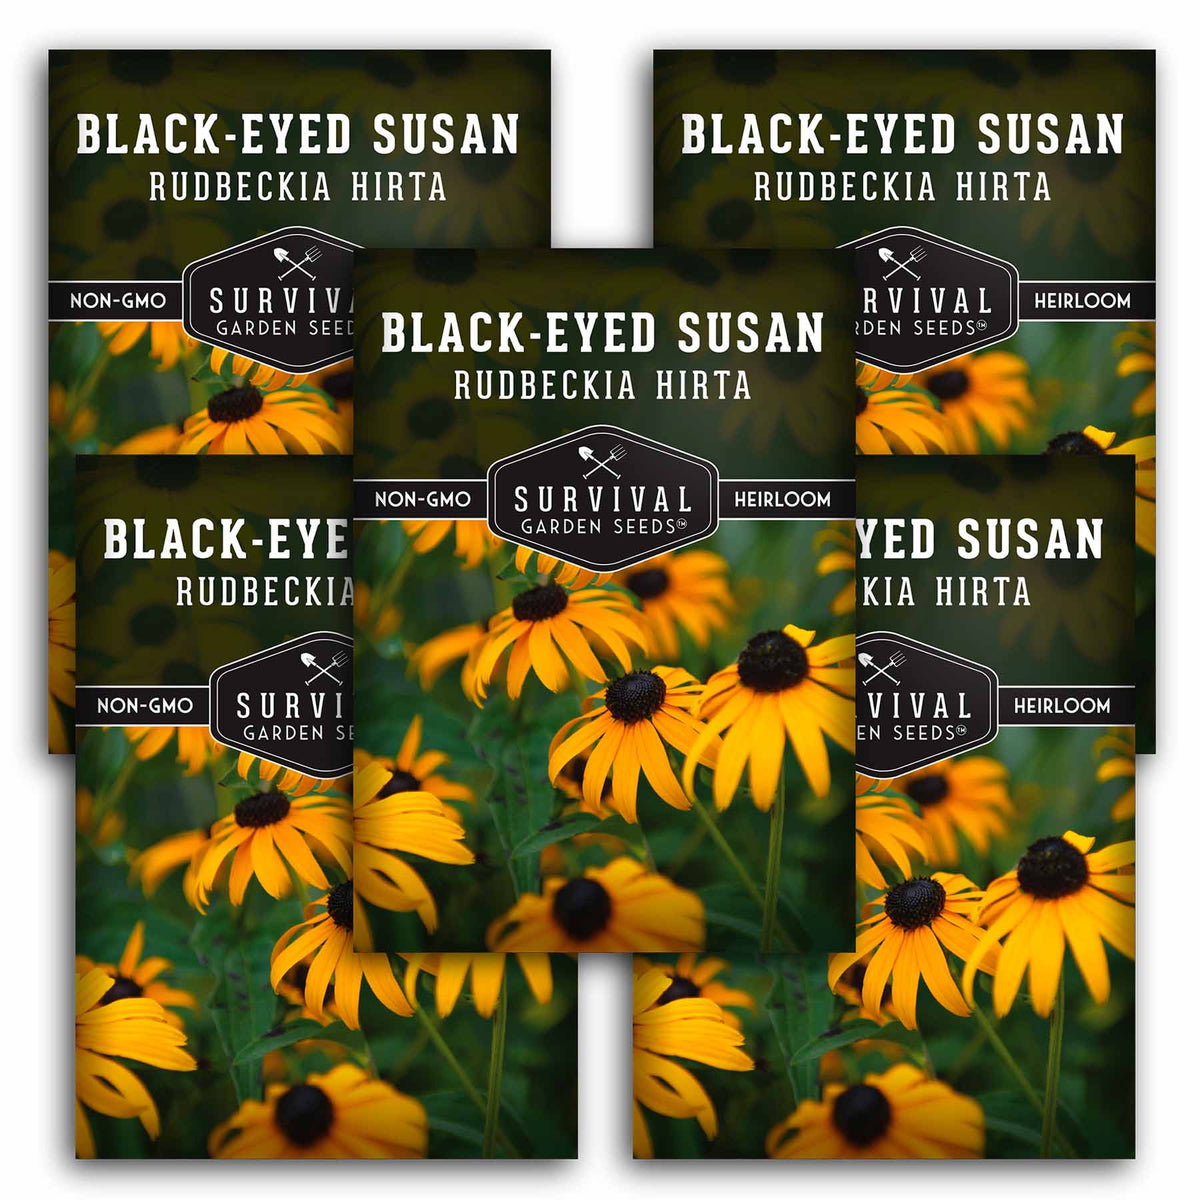 5 packets of Blackeyed Susan seeds